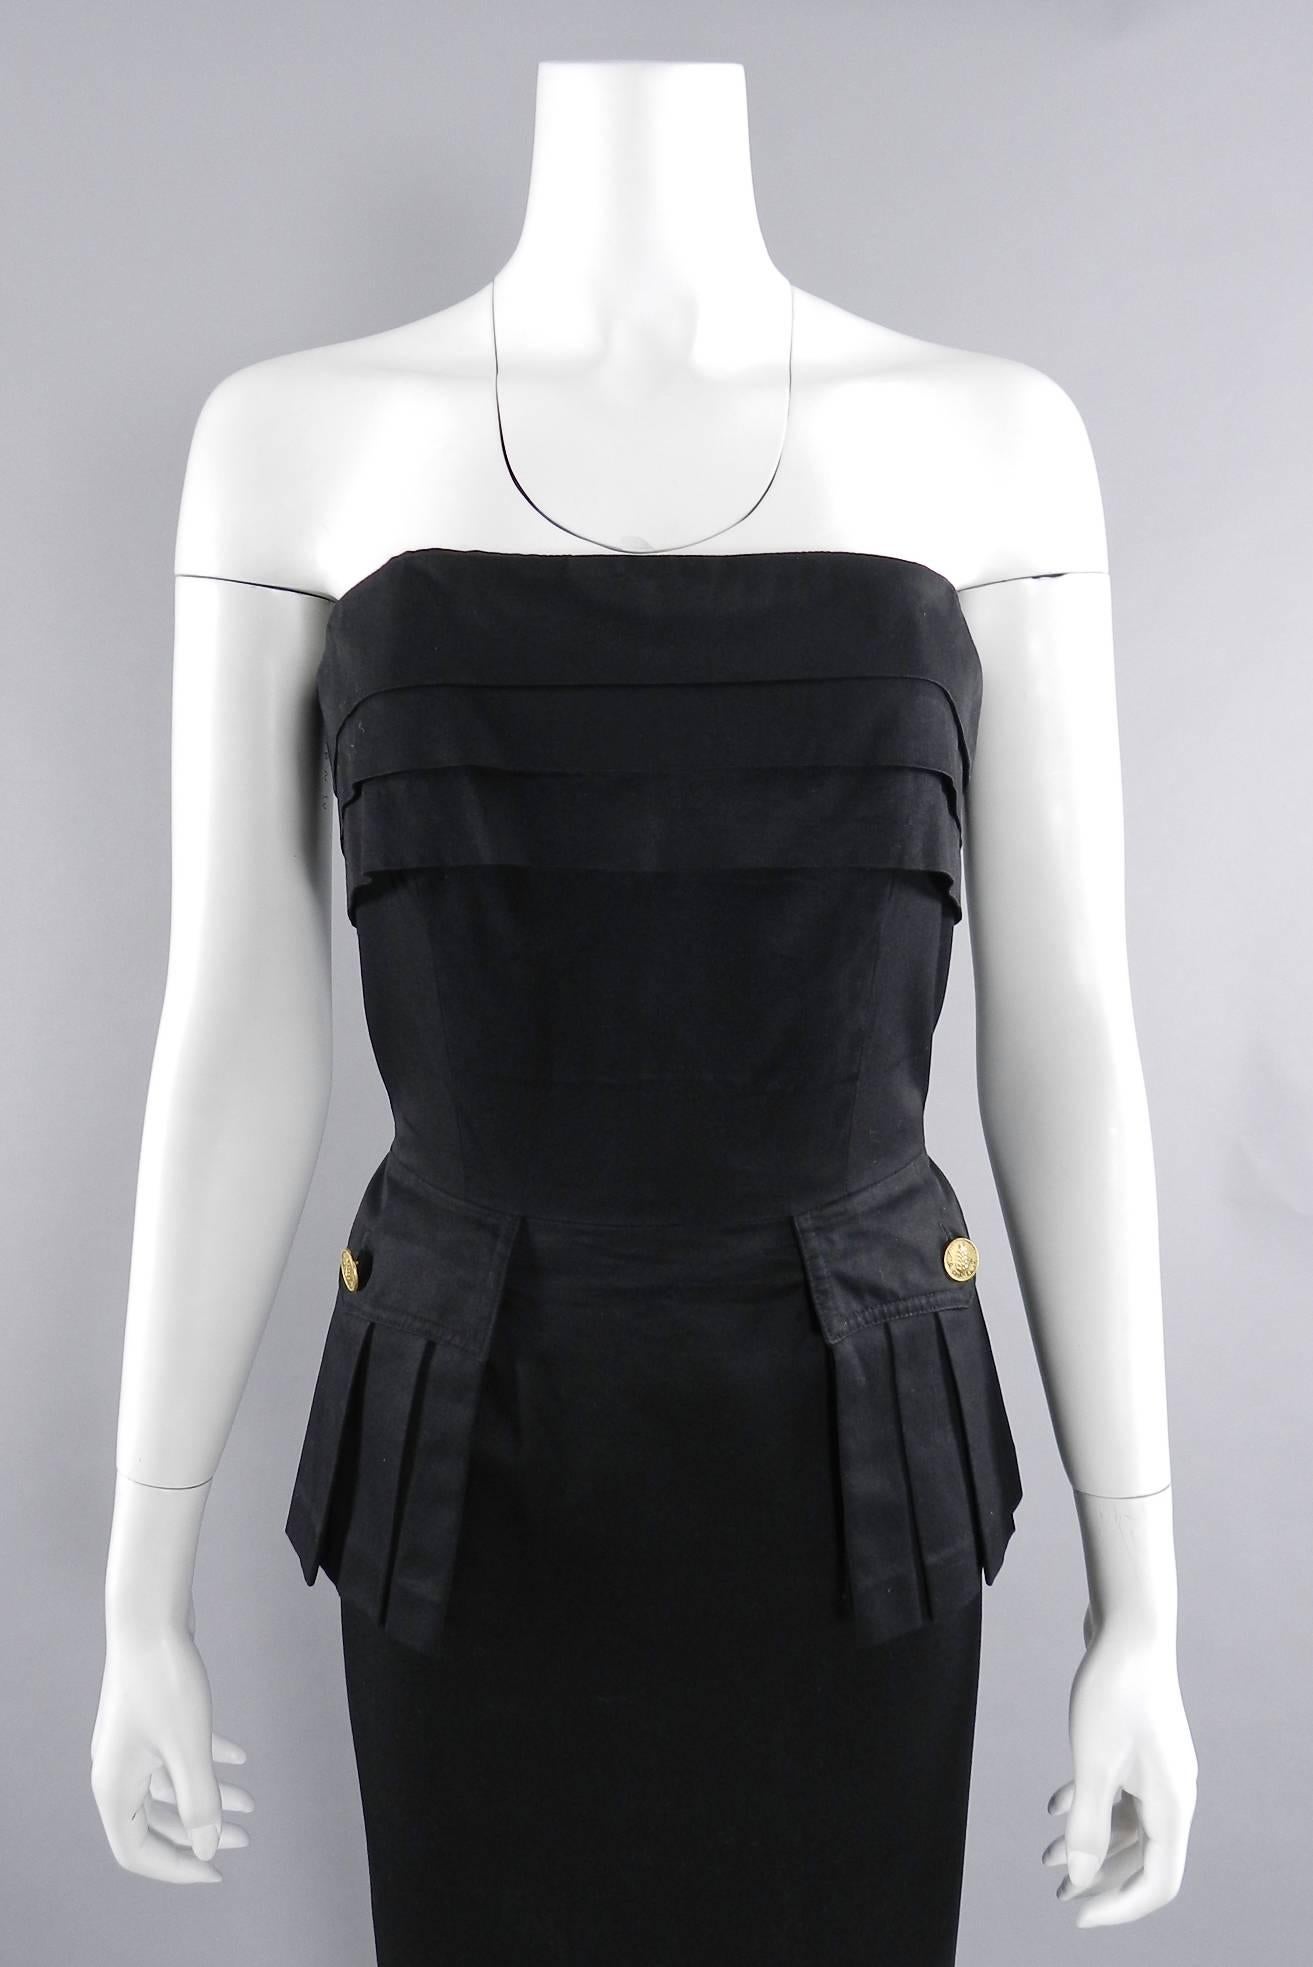 Women's Chanel Vintage 1987 Black Strapless Cotton Dress with Wheat Buttons